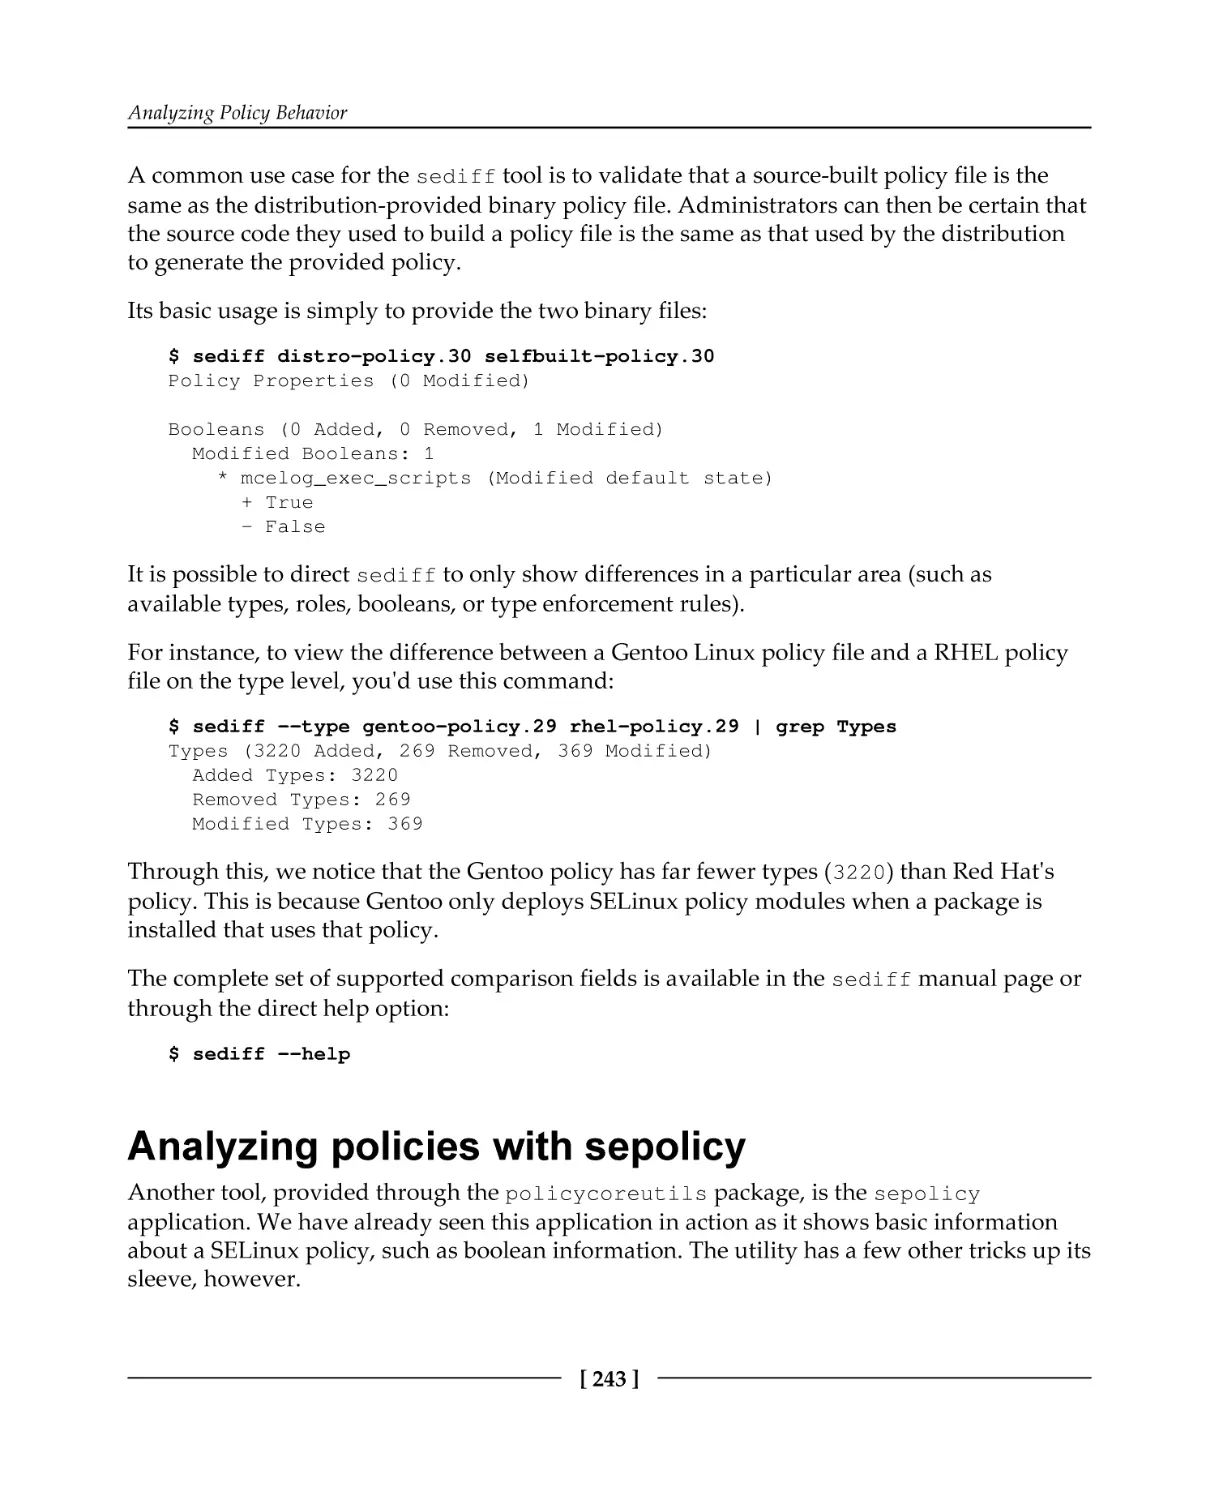 Analyzing policies with sepolicy